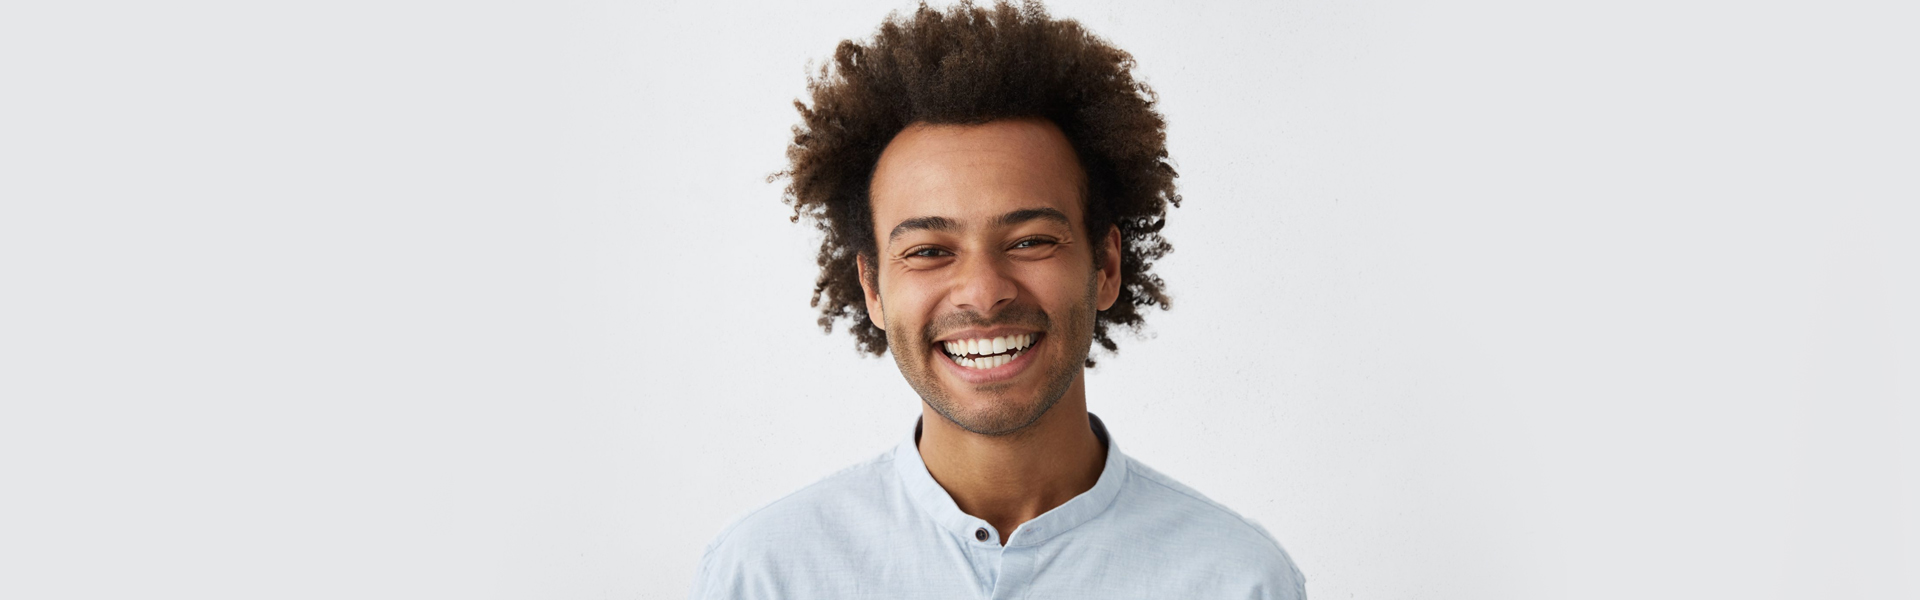 How to Get Whiter Teeth- The 3 Things You Need to Know